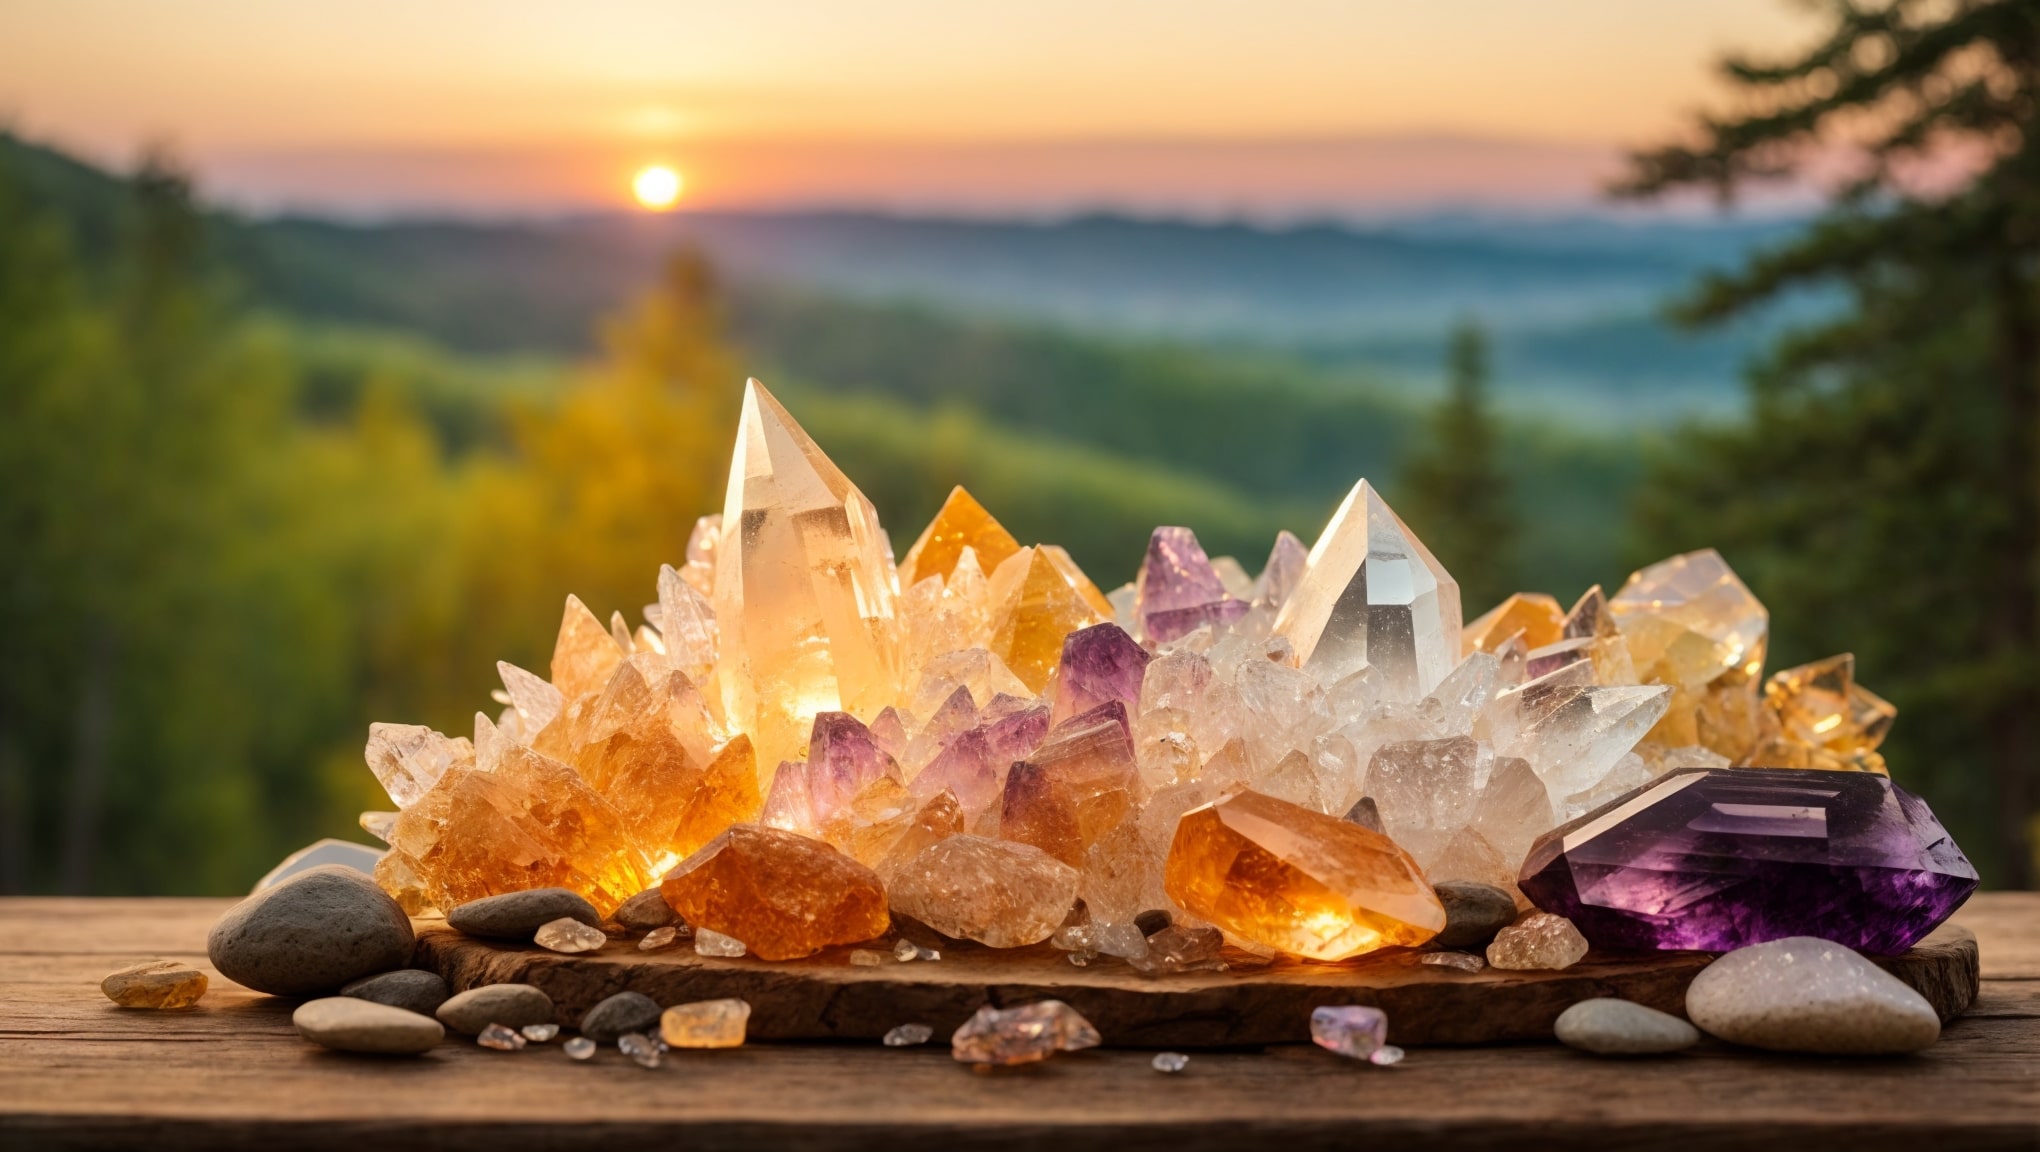 Crystal gifts for new beginnings and milestone.